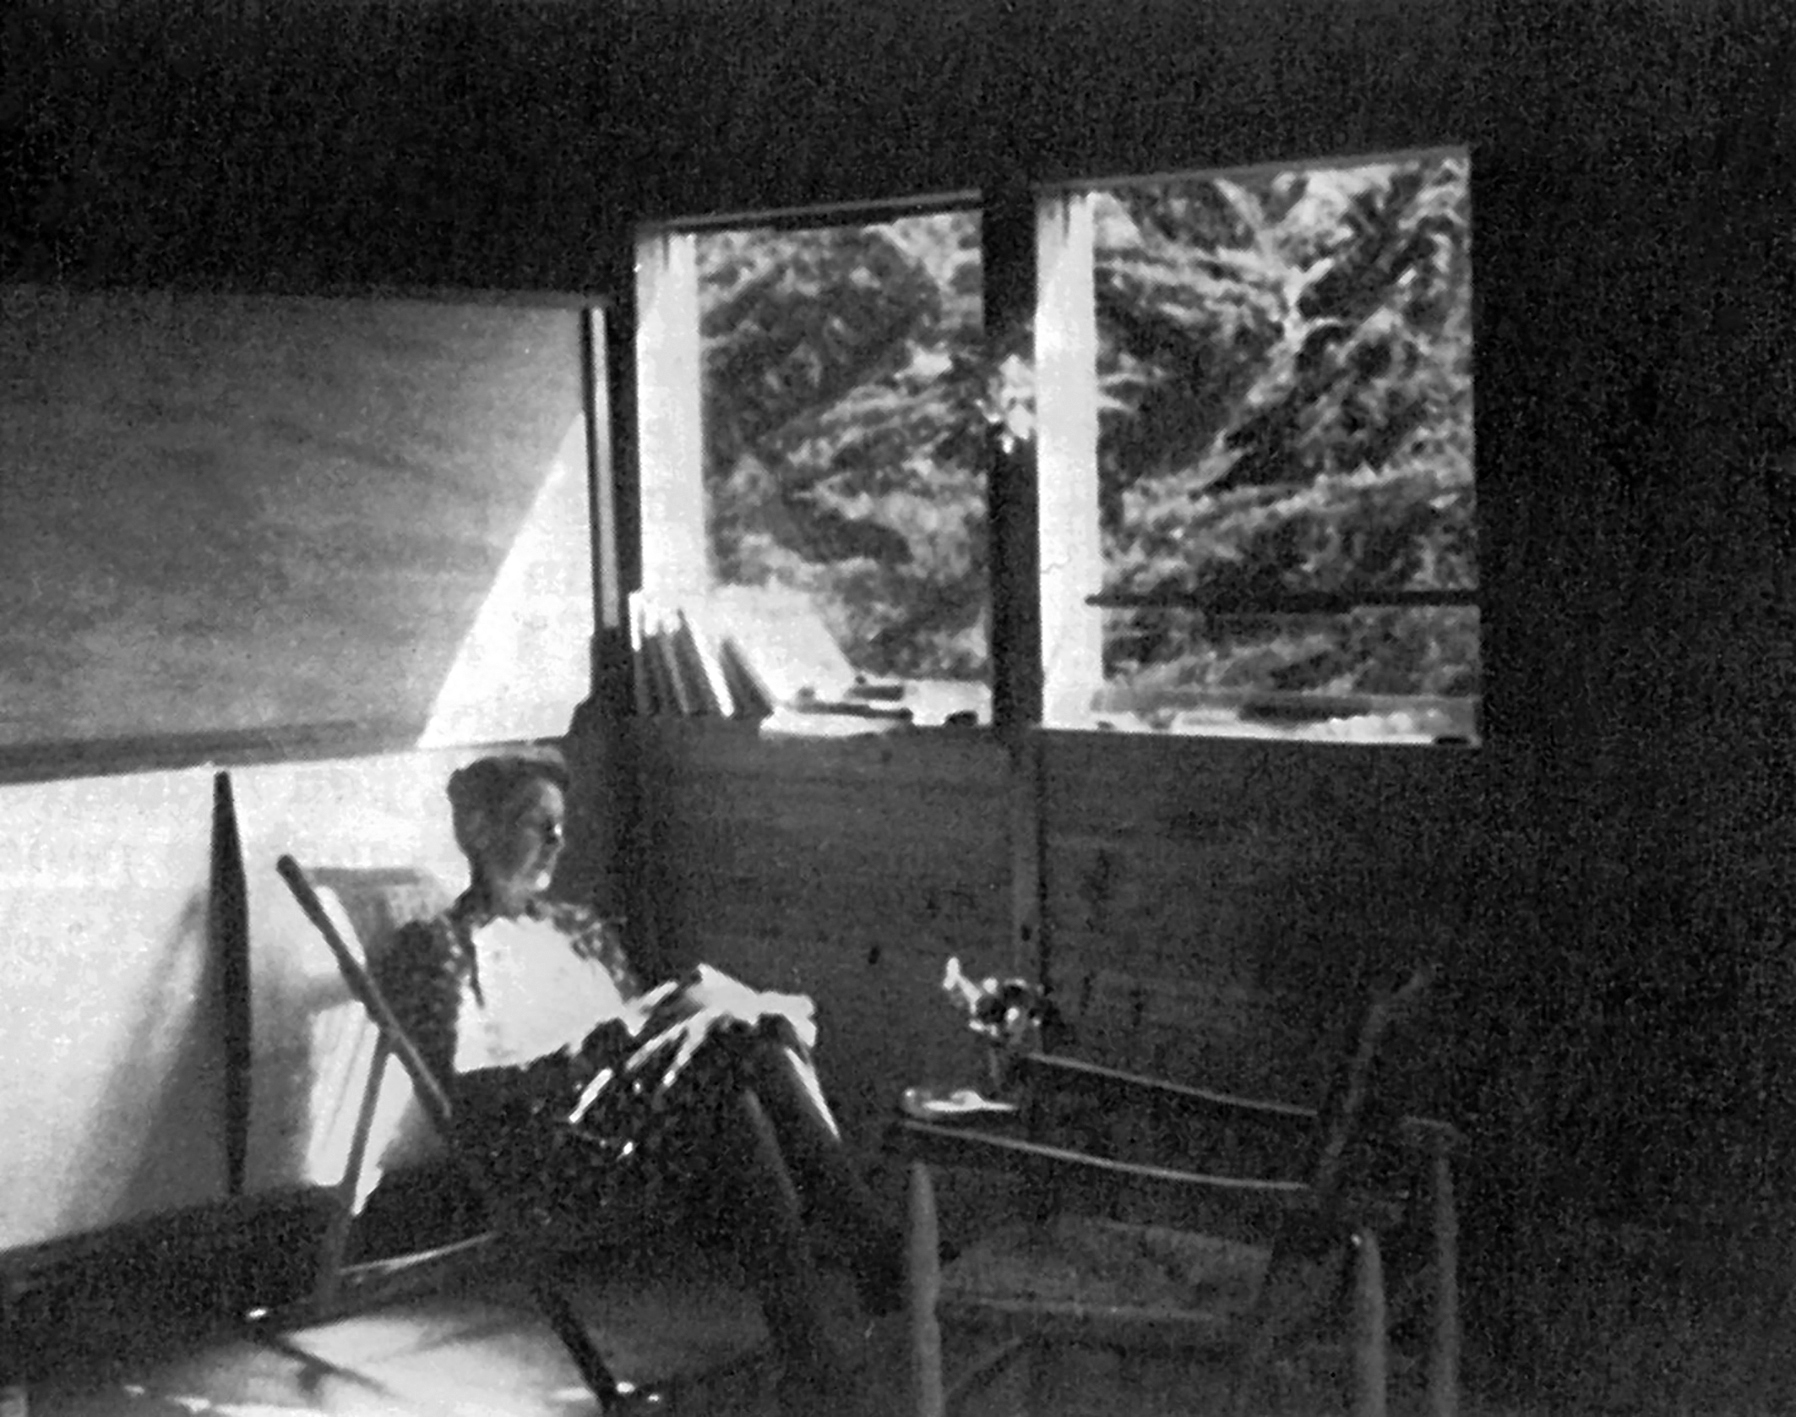 Madeleine Prouvé in the 8x8 demountable house in Carnac, Brittany, summer 1946.